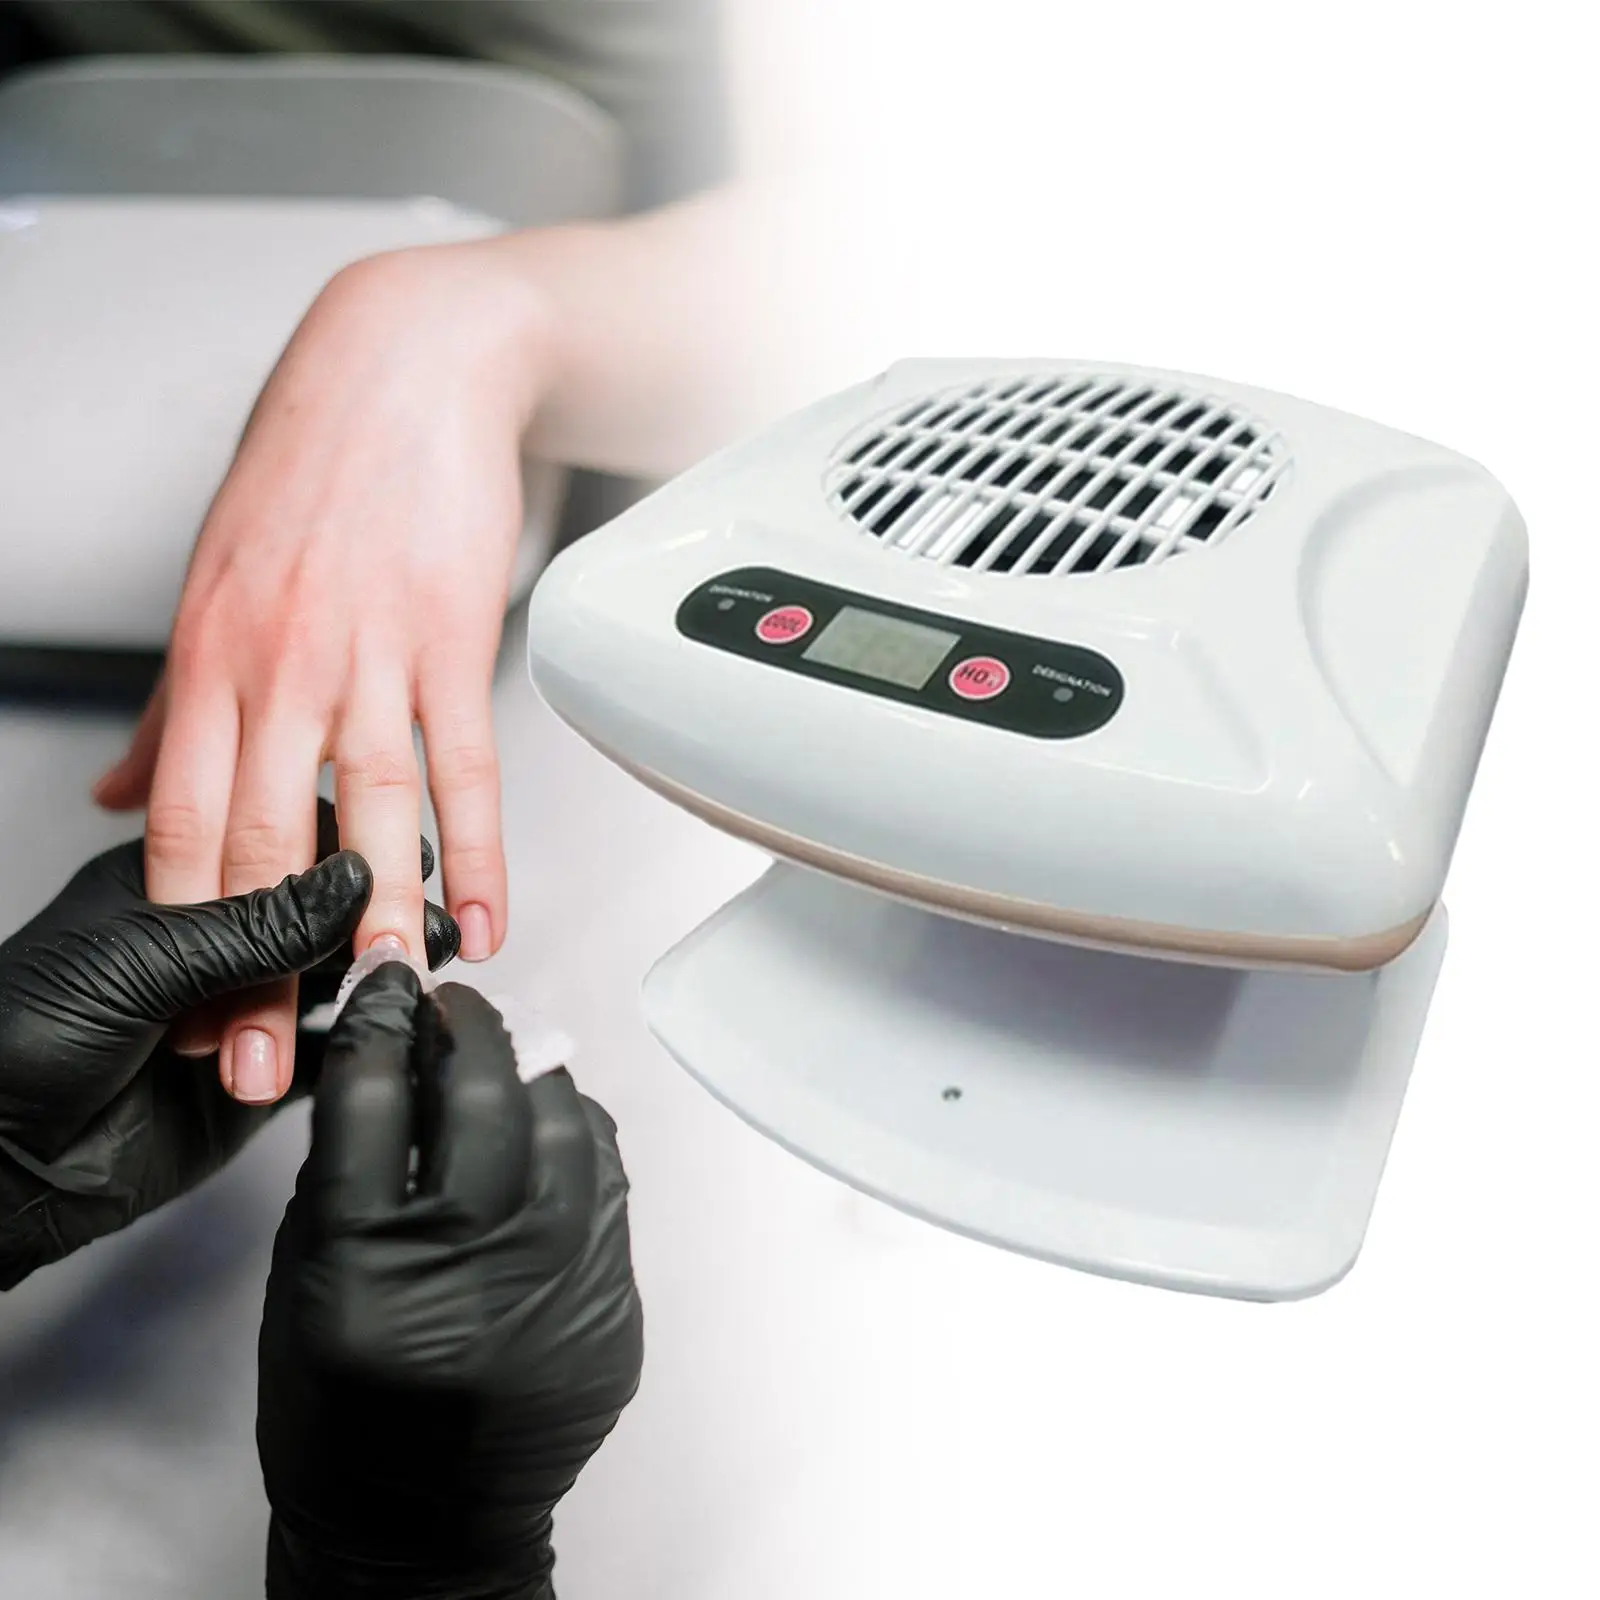 Air Nail Dryer Manicure Pedicure Drying Machine hot cold Wind for Dipping Powder